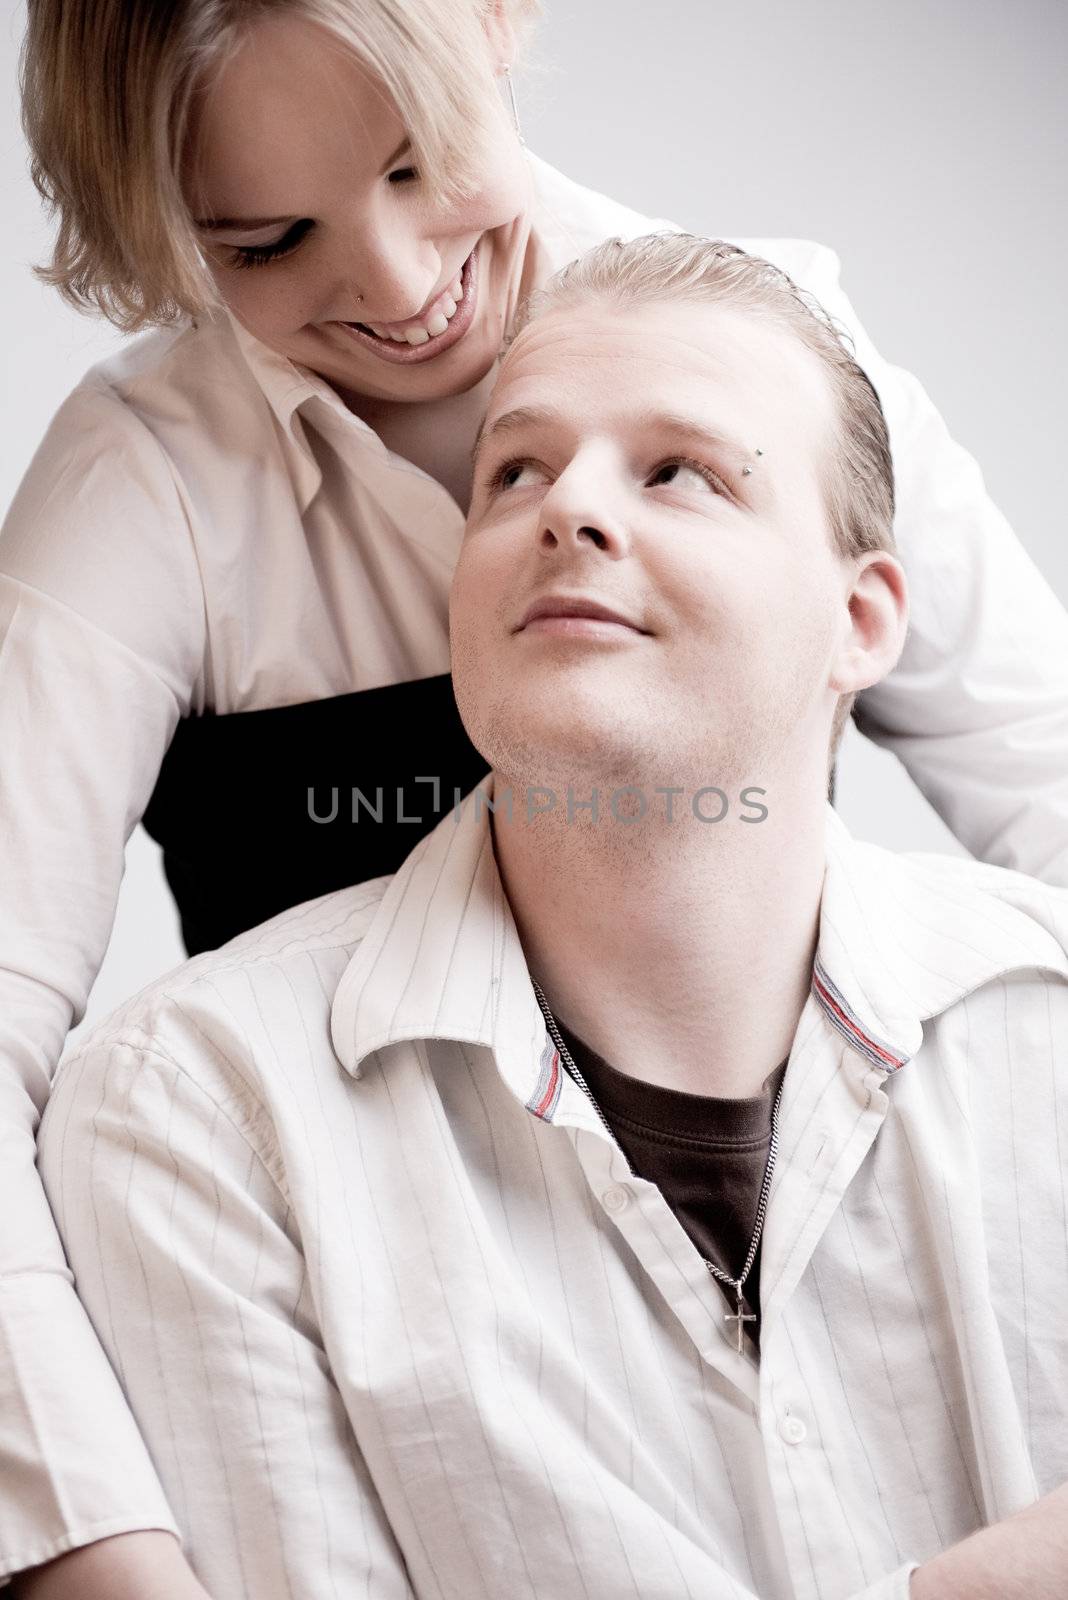 Studio portrait of a young amorous couple making eye contact with eachother